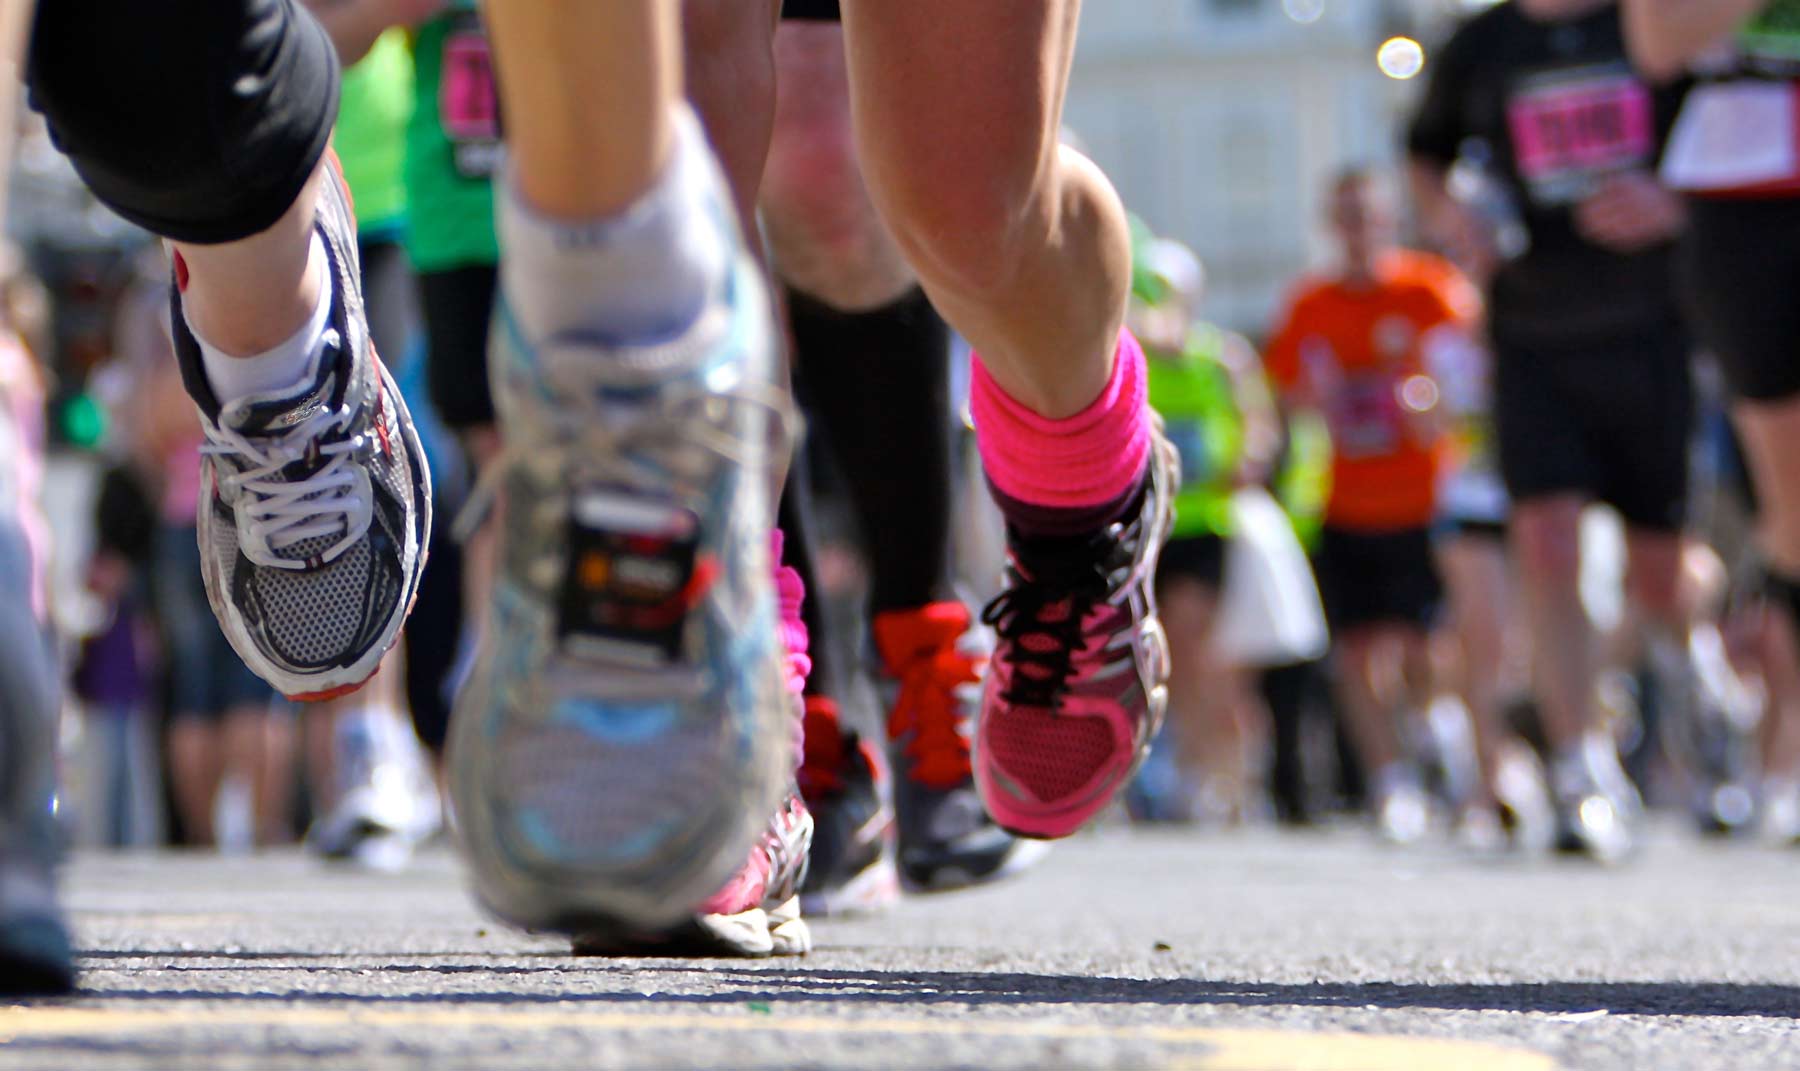 Close up of runner's shoes during a marathon